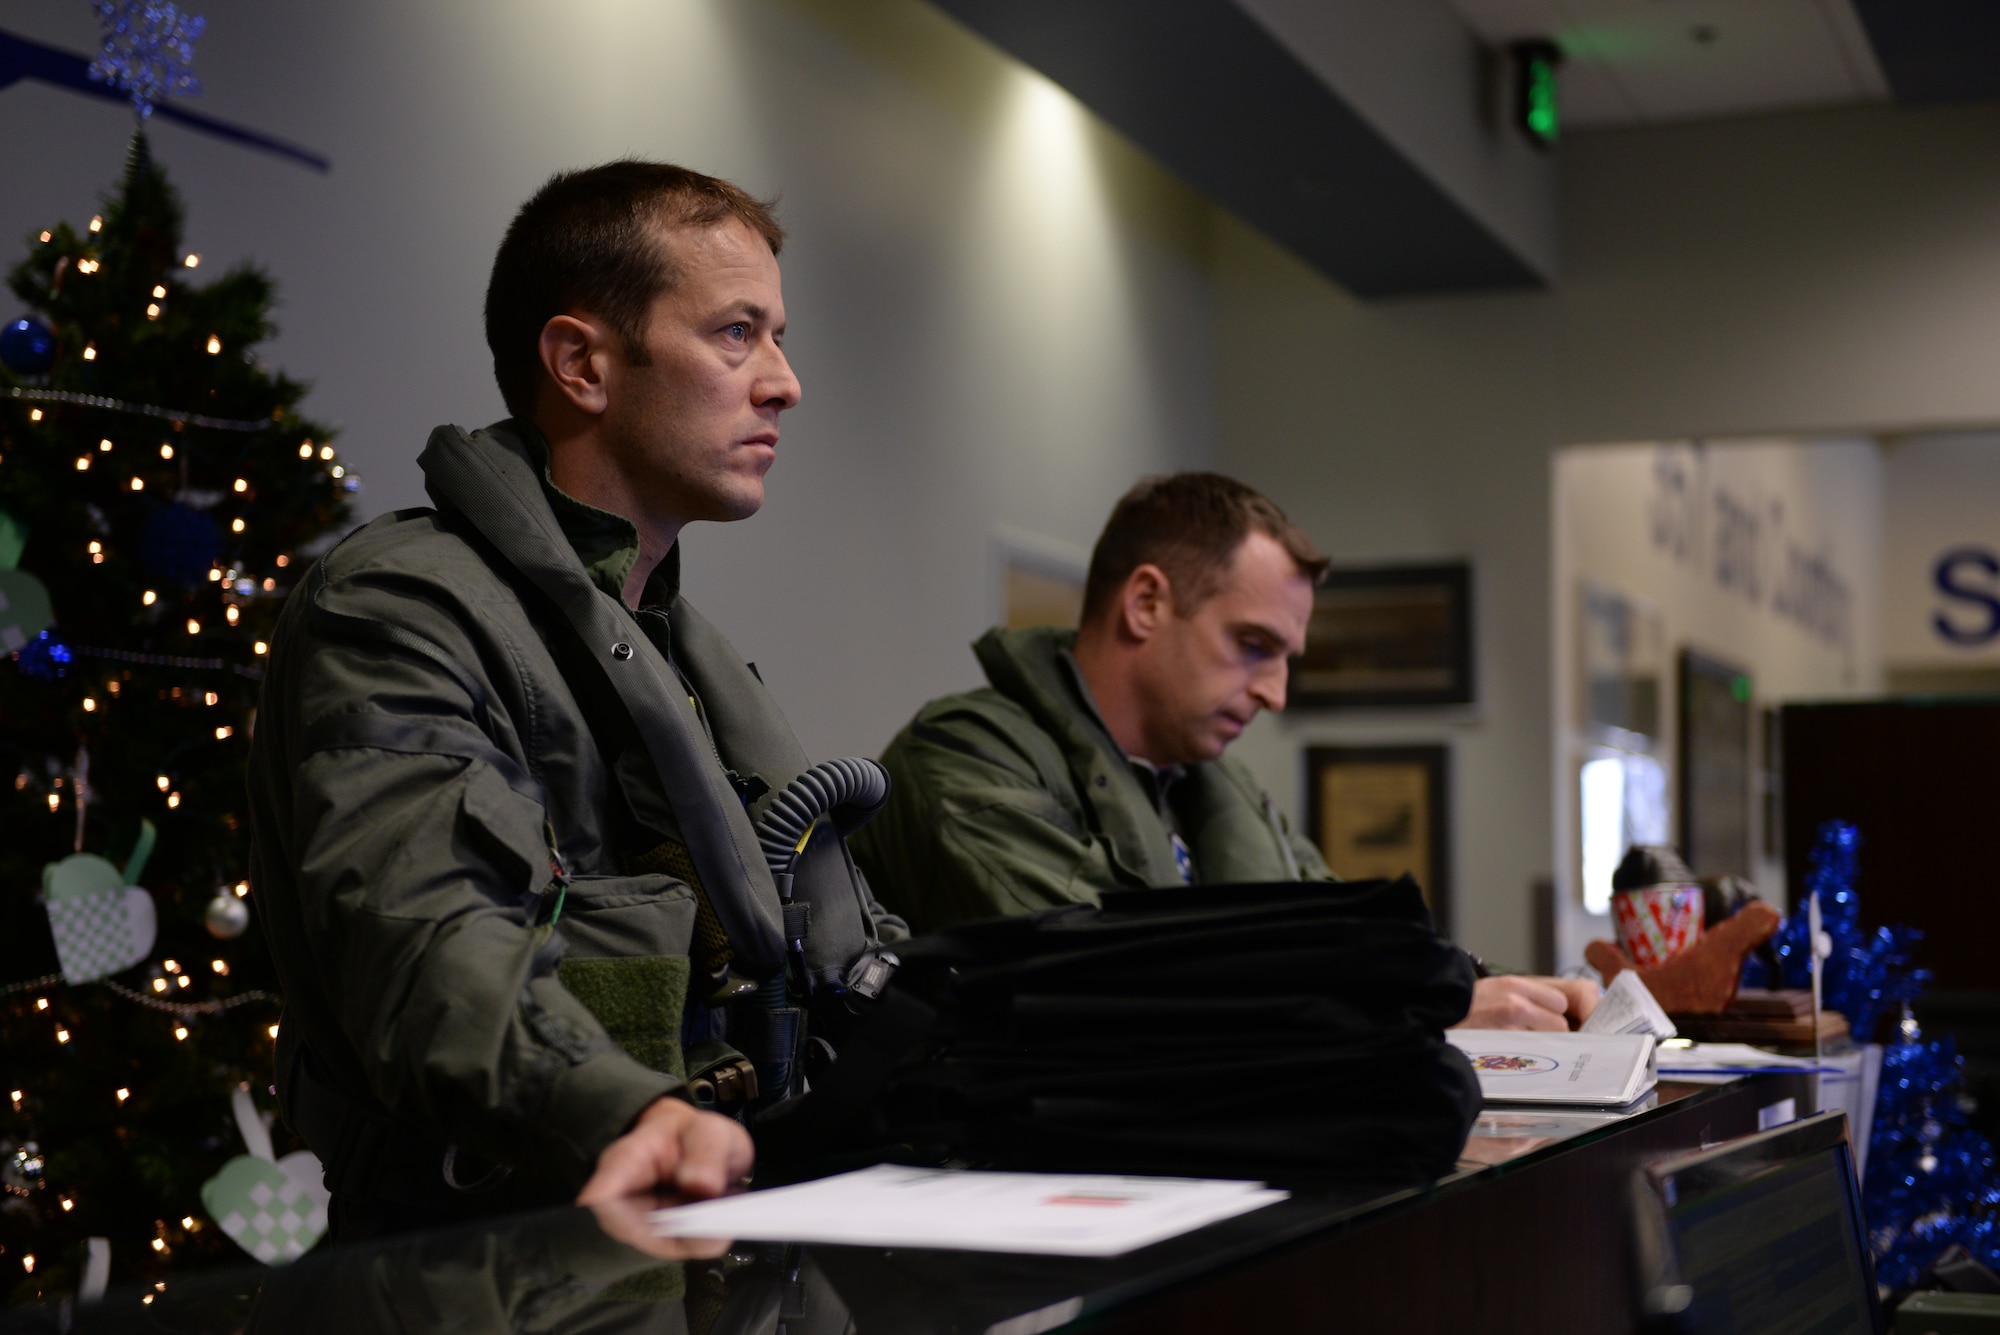 Norwegian Maj. Morten Hanche, 62nd Fighter Squadron F-35 student pilot, listens to his pre-flight brief alongside his sortie wingman and guide, Lt. Col. Gregory Frana, 62nd FS commander, Dec. 14, 2015, at Luke Air Force Base. Hanche has been training with the American pilots of the 62nd FS for the past few months to fly the F-35. (U.S. Air Force photo by Airman 1st Class Ridge Shan)